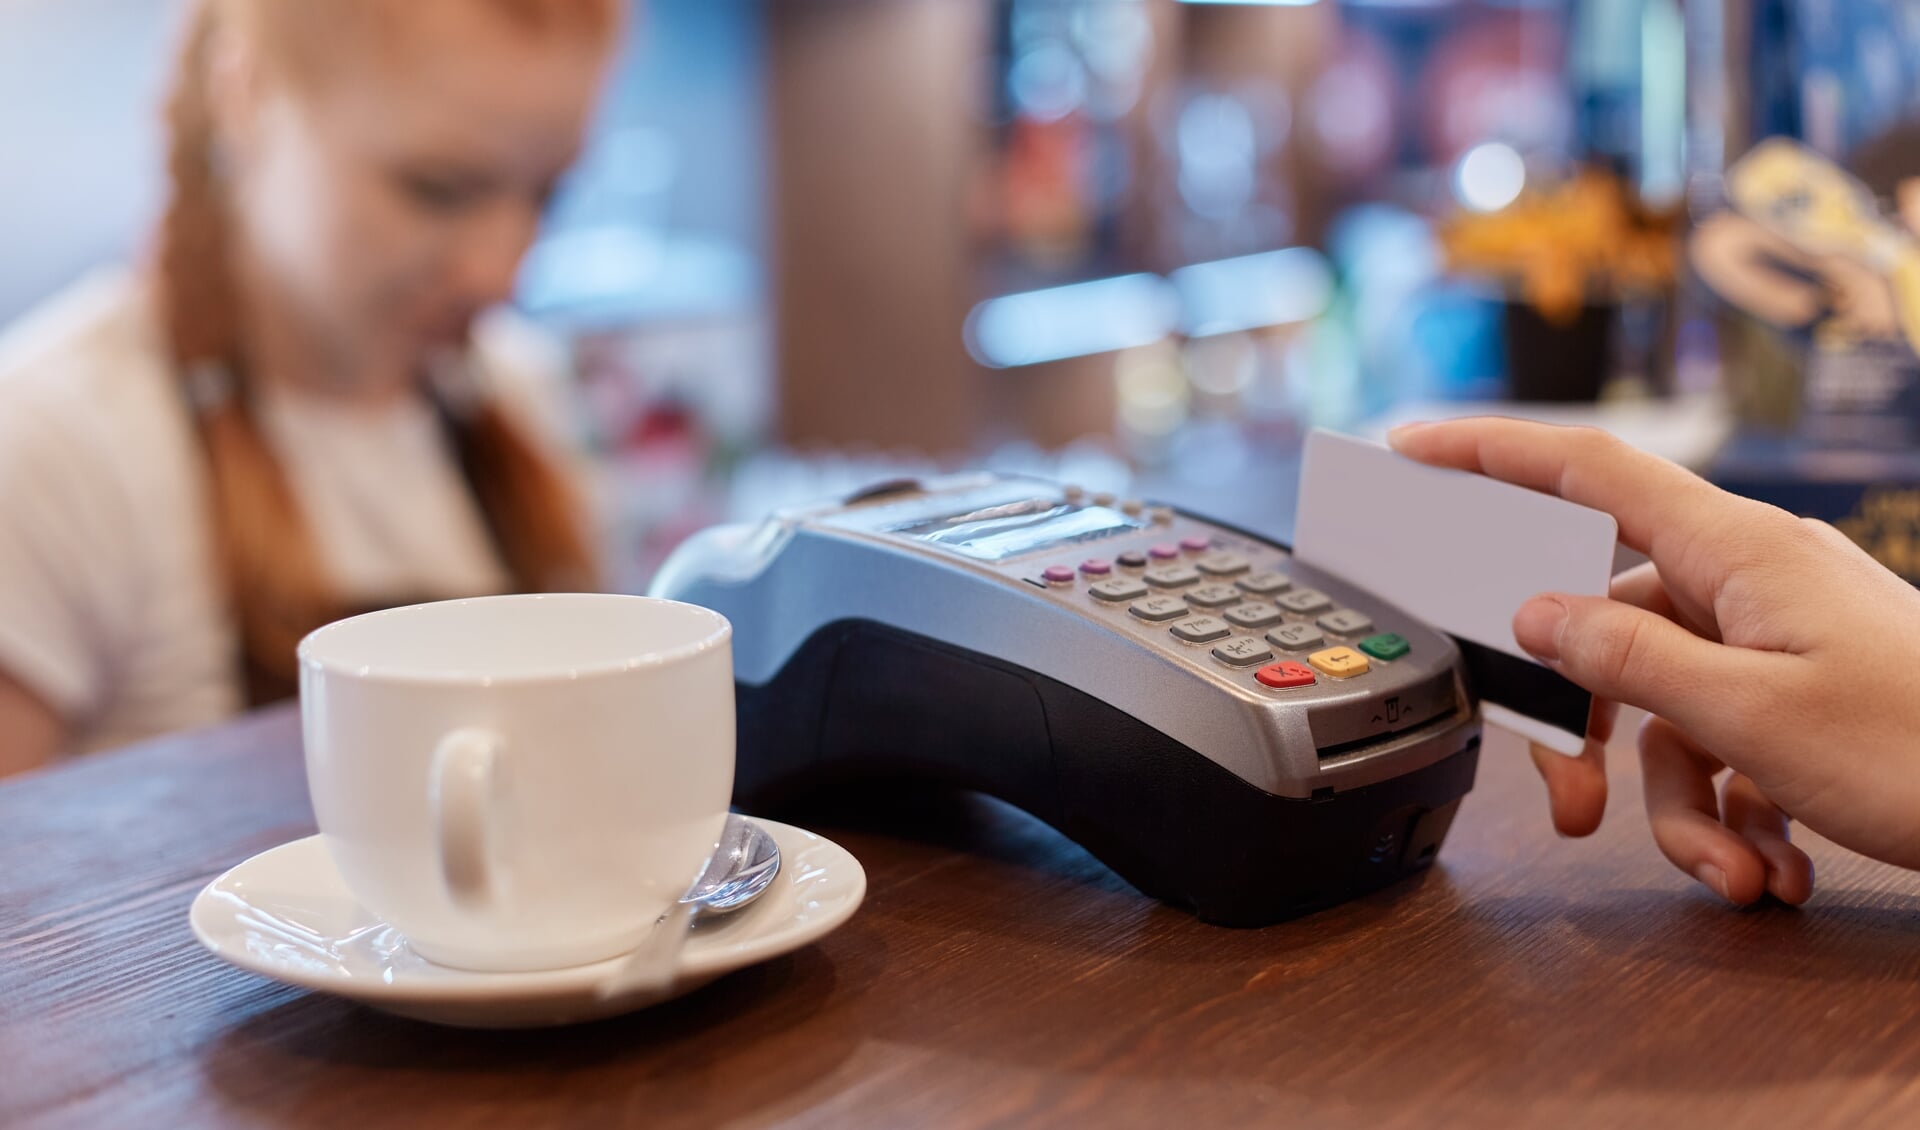 Customer paying for cup of coffee with card, using terminal for paying, white cup of coffee and red haired barista on background, faceless person uses device and card.